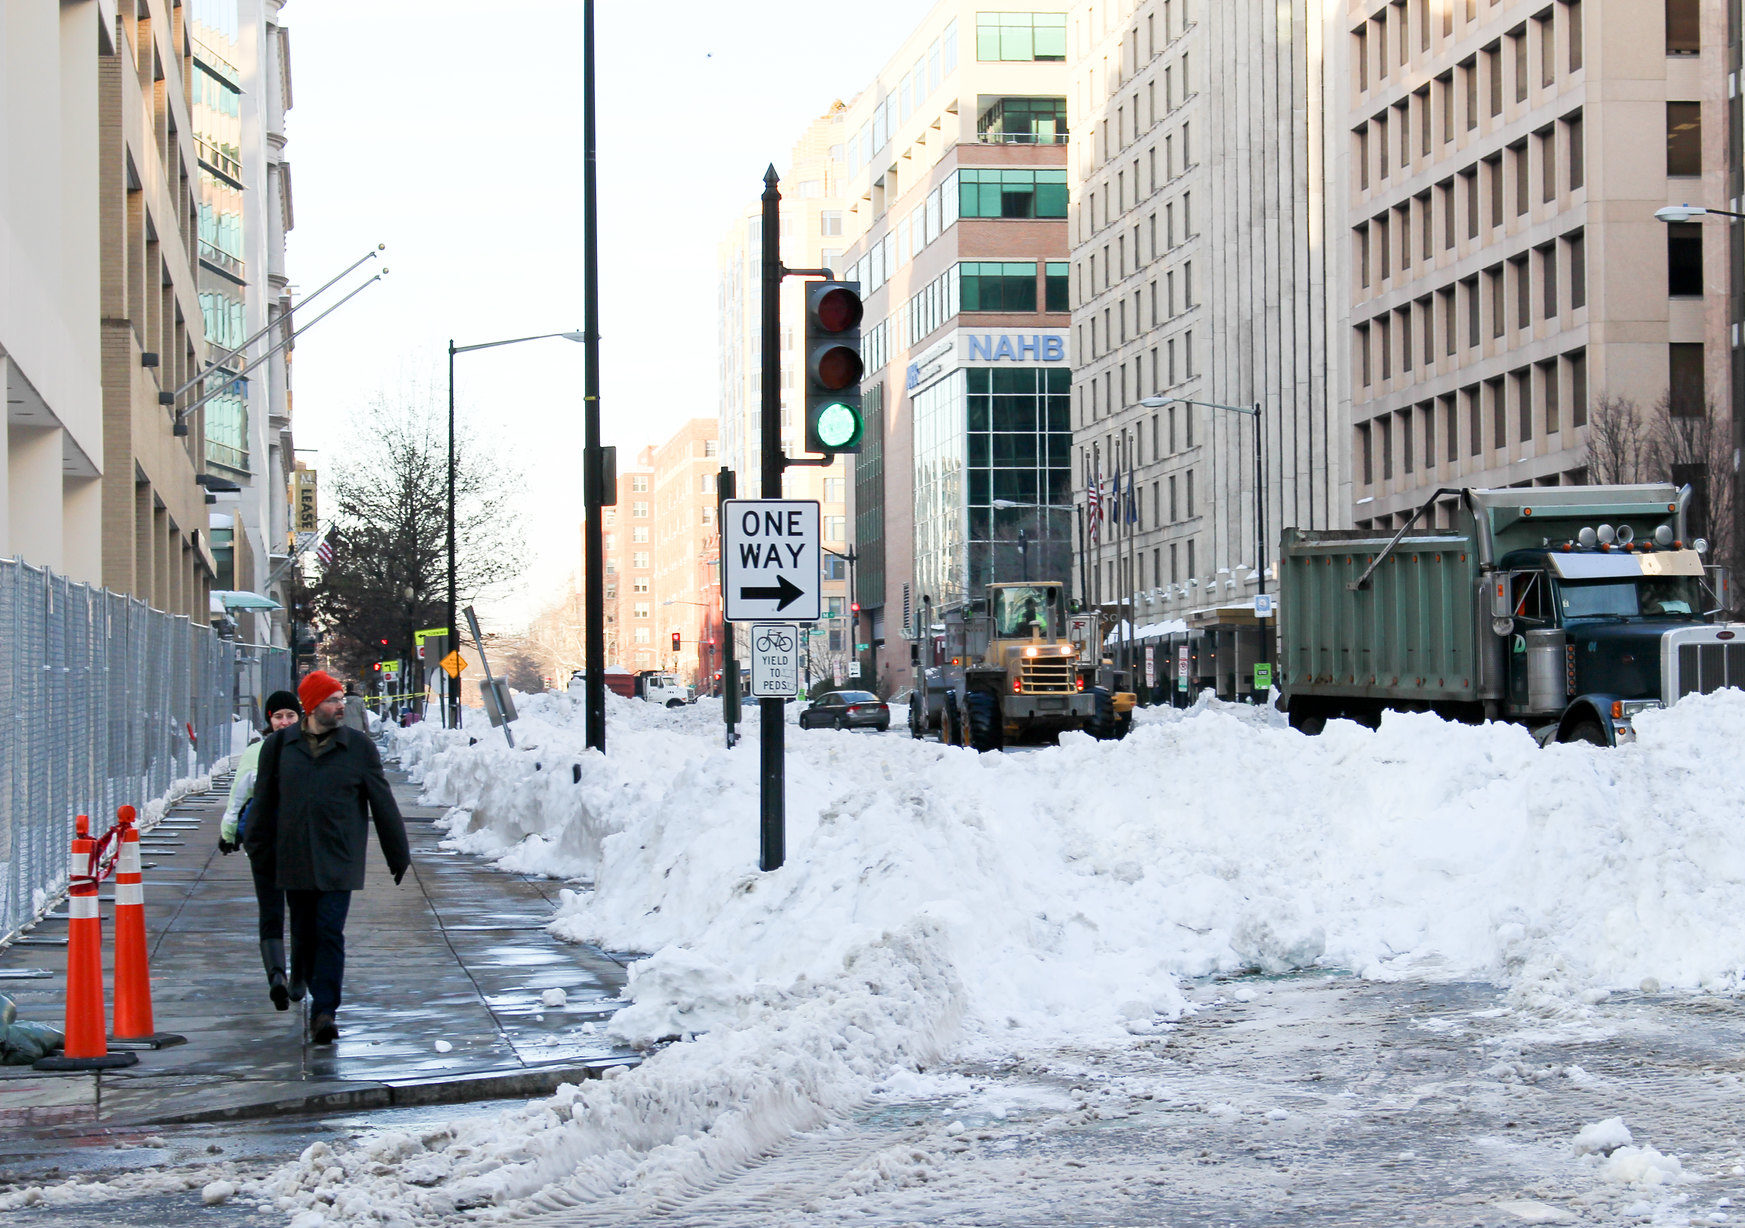 Pedestrians attempt to cross the street next to a pile of snow blocking a one-way lane